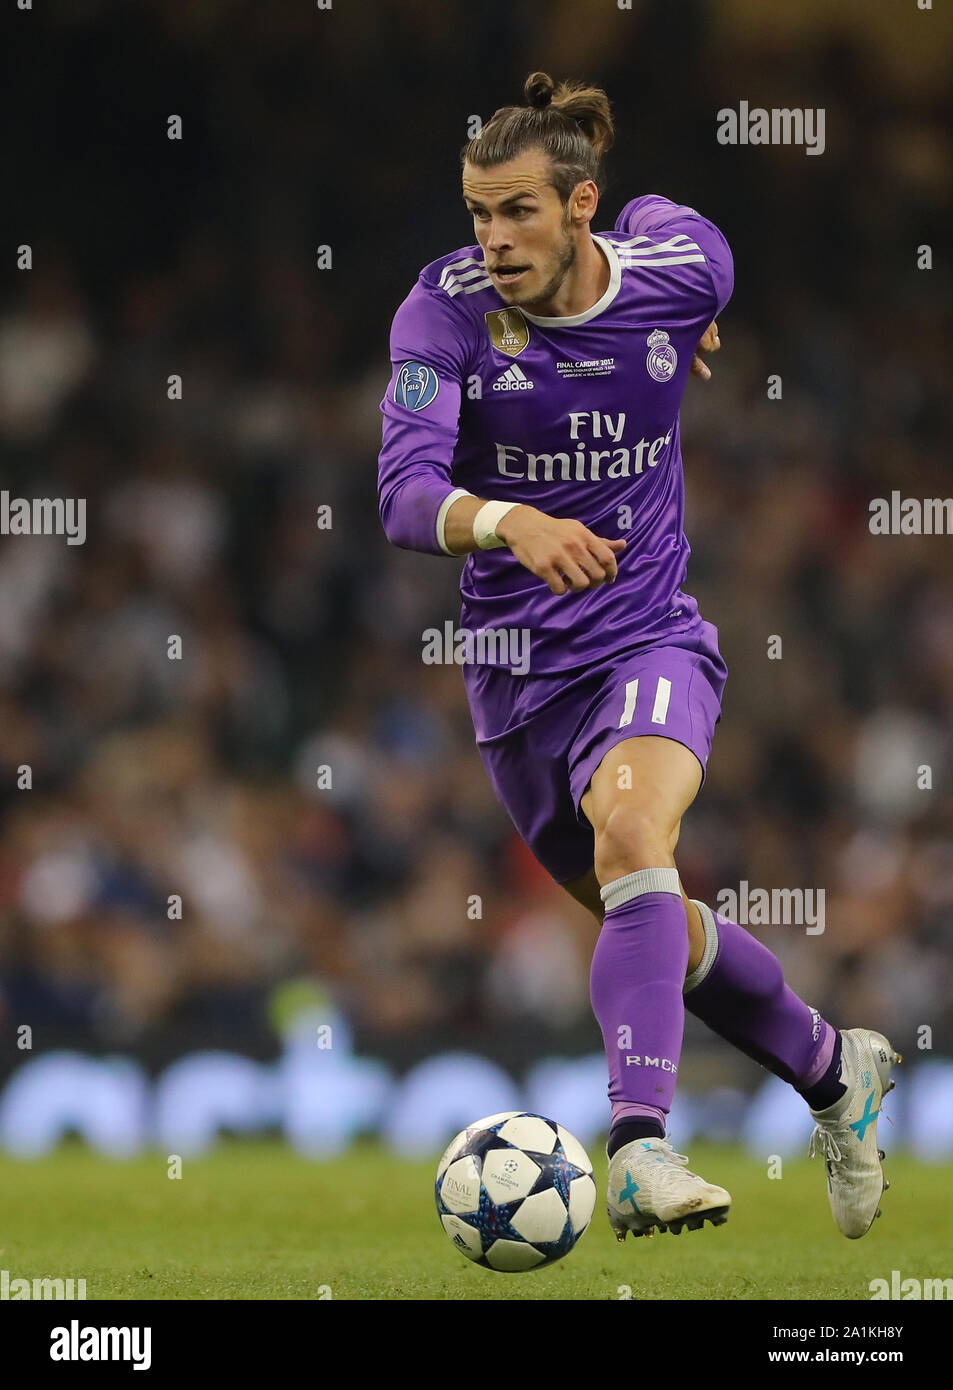 Gareth Bale of Real Madrid - Juventus v Real Madrid, UEFA Champions League  Final, National Stadium of Wales, Cardiff - 3rd June 2017 Stock Photo -  Alamy